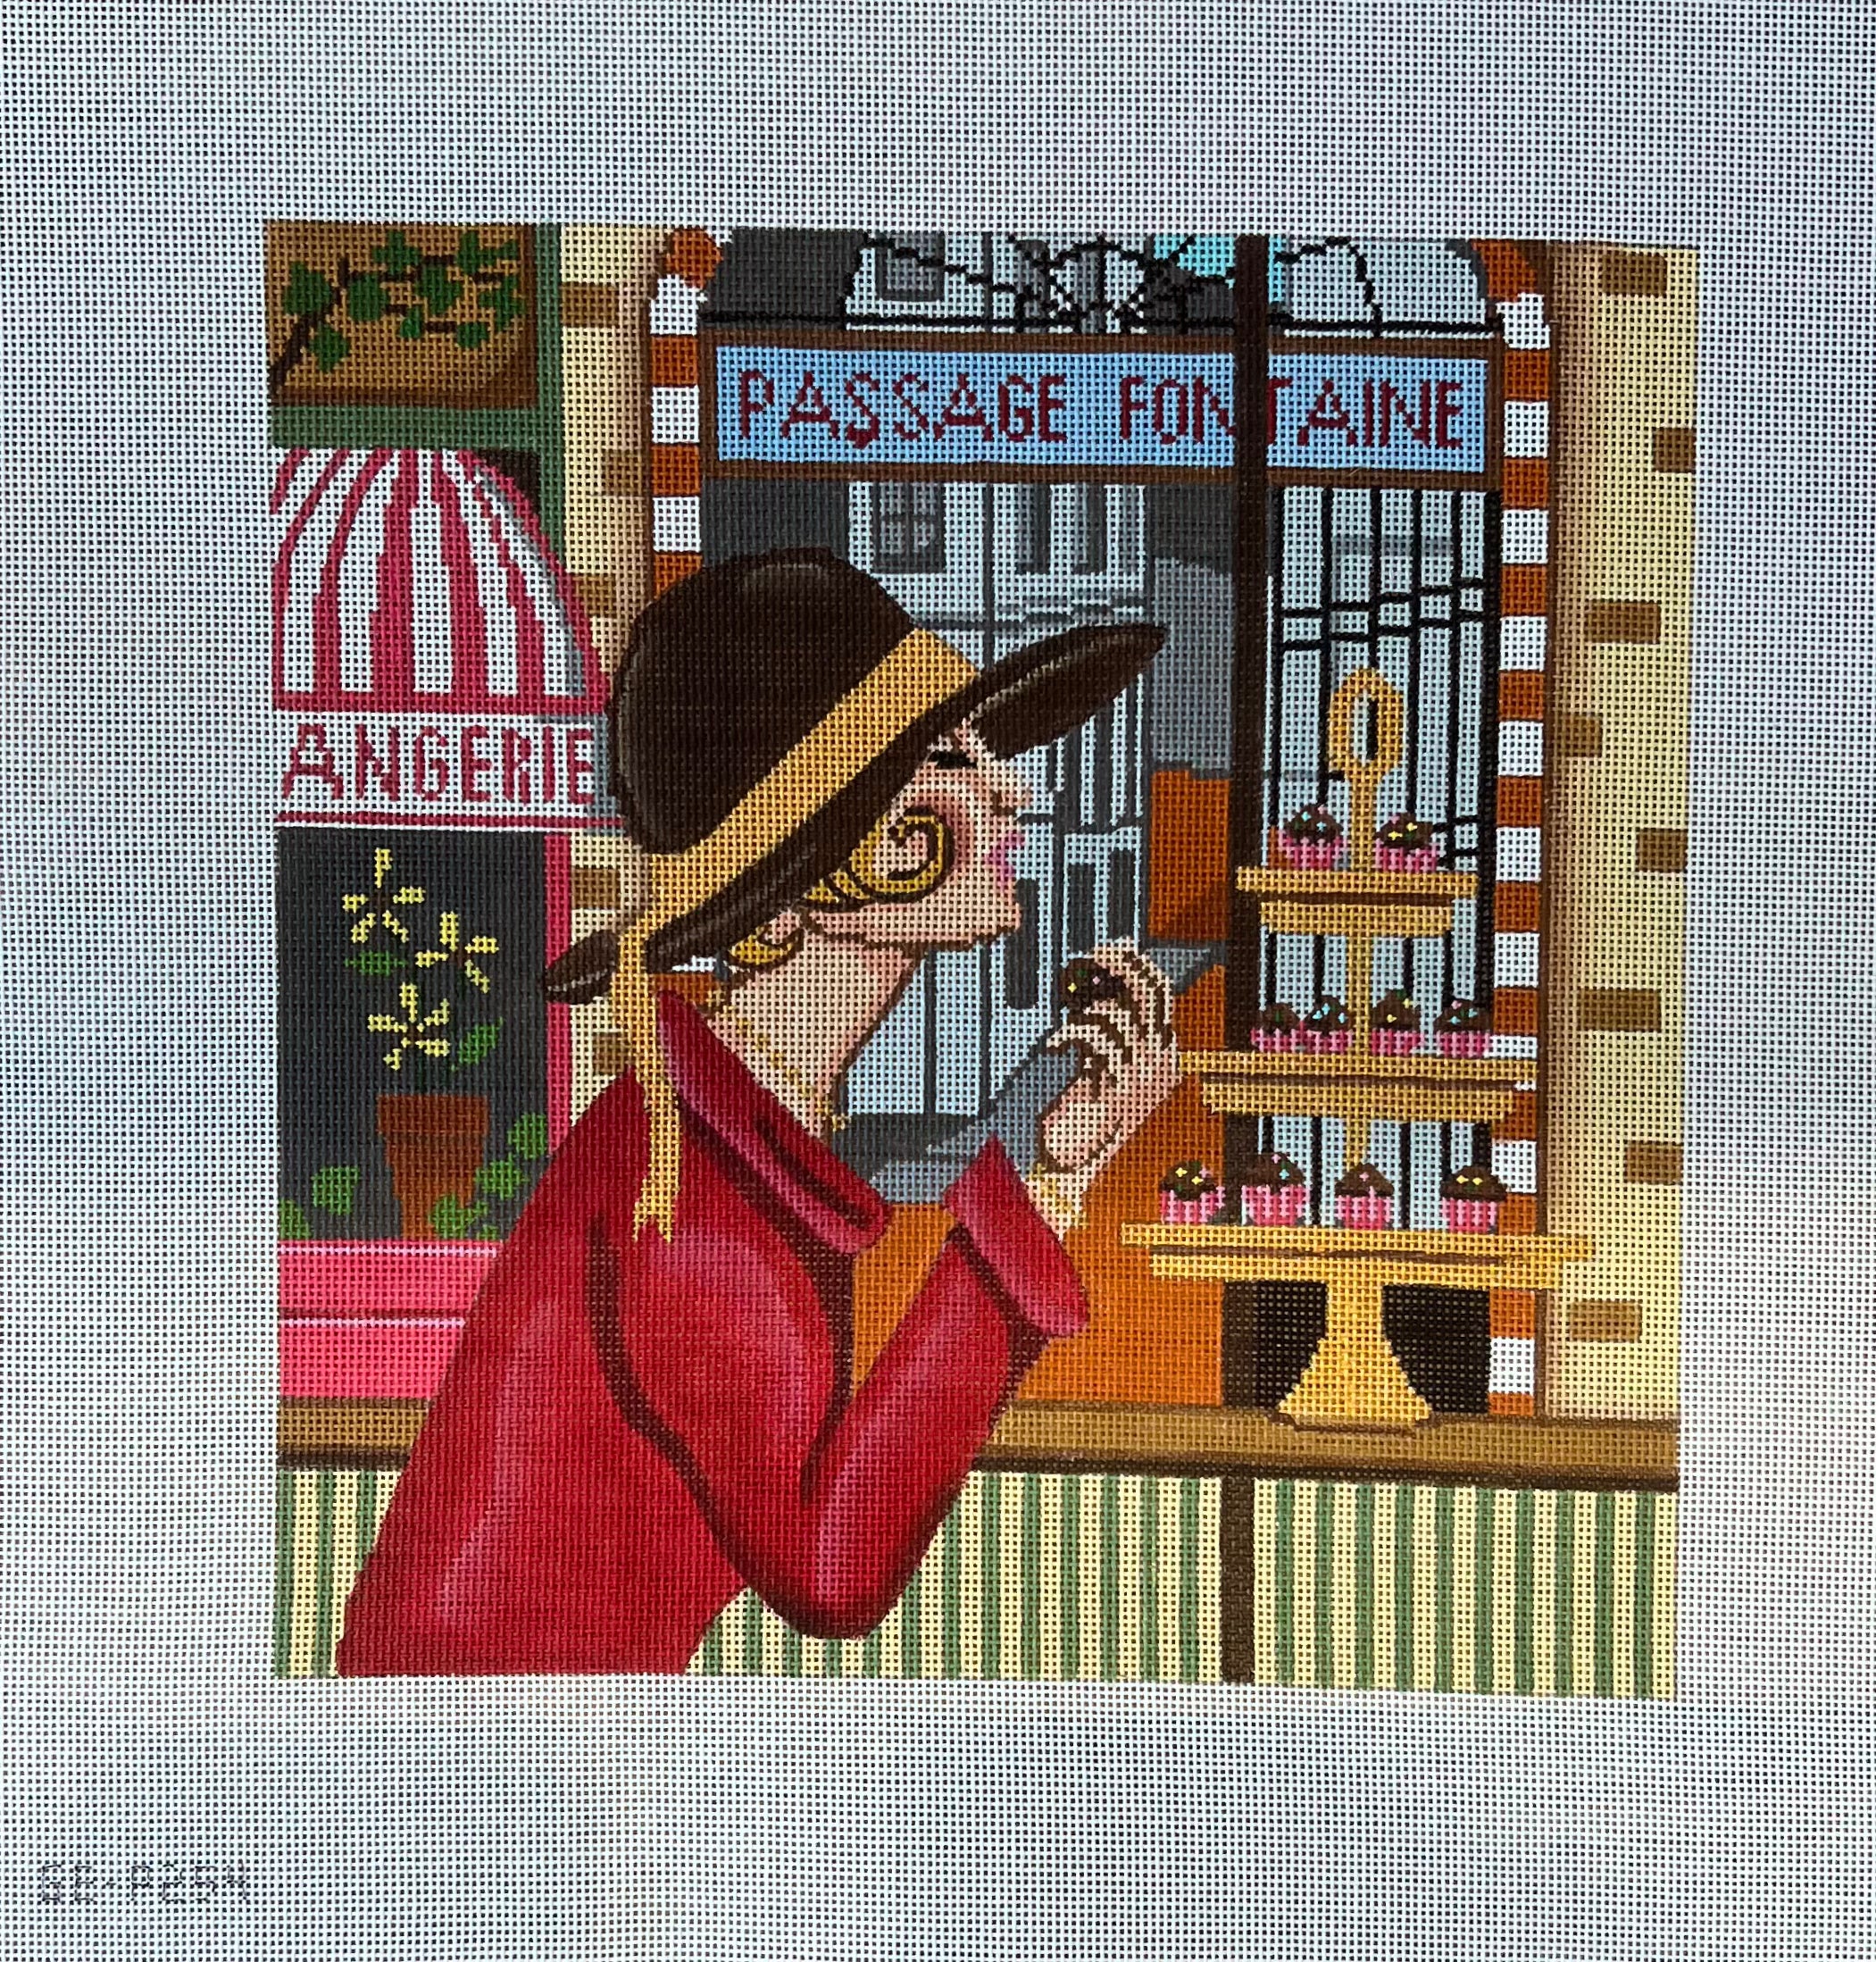 Image of Gayla Elliott P254 Lady with Pastry